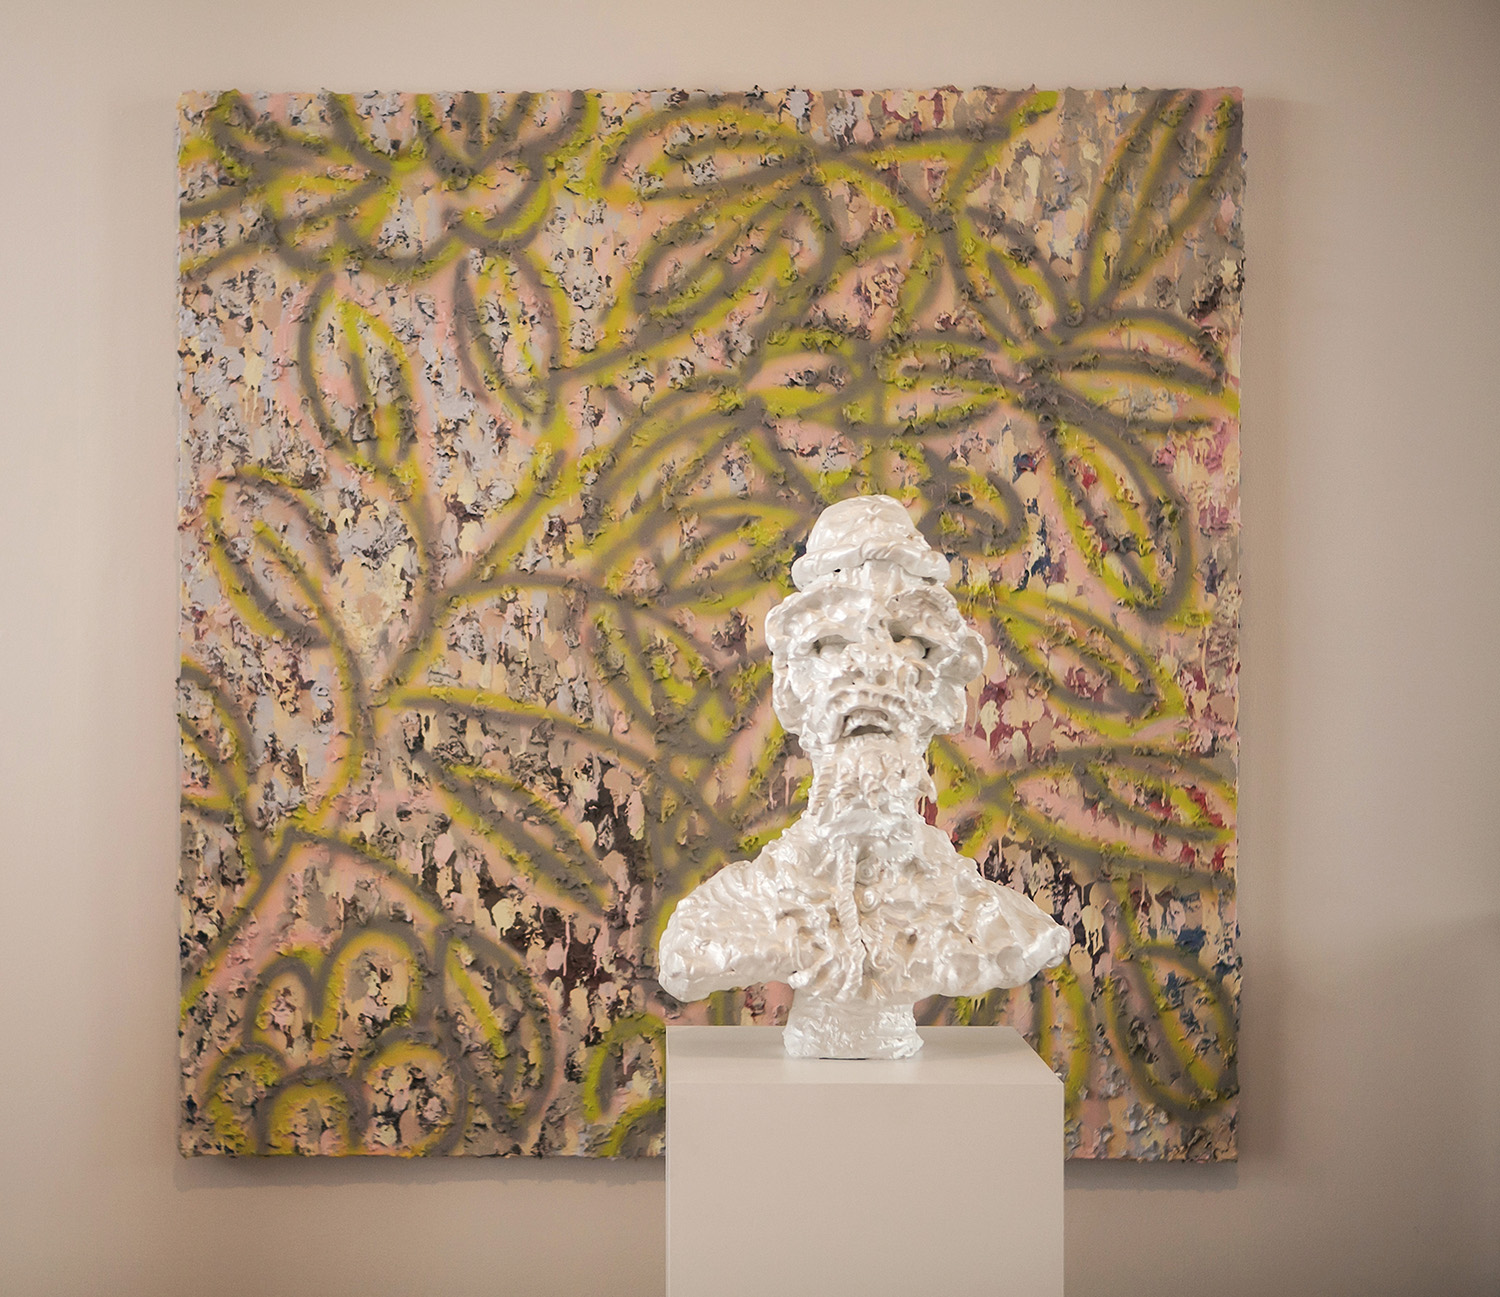   Soldier in Palace Garden , 2015; iridescent acrylic on fired ceramic with paper mache and paint on canvas; 88”H x 60”W x 38”D  Photo credit Amanda Tipton    
  
 0 
 0 
 1 
 22 
 131 
 RMCAD 
 1 
 1 
 152 
 14.0 
  
  
 
  
    
  
 Normal 
 0 
 
 